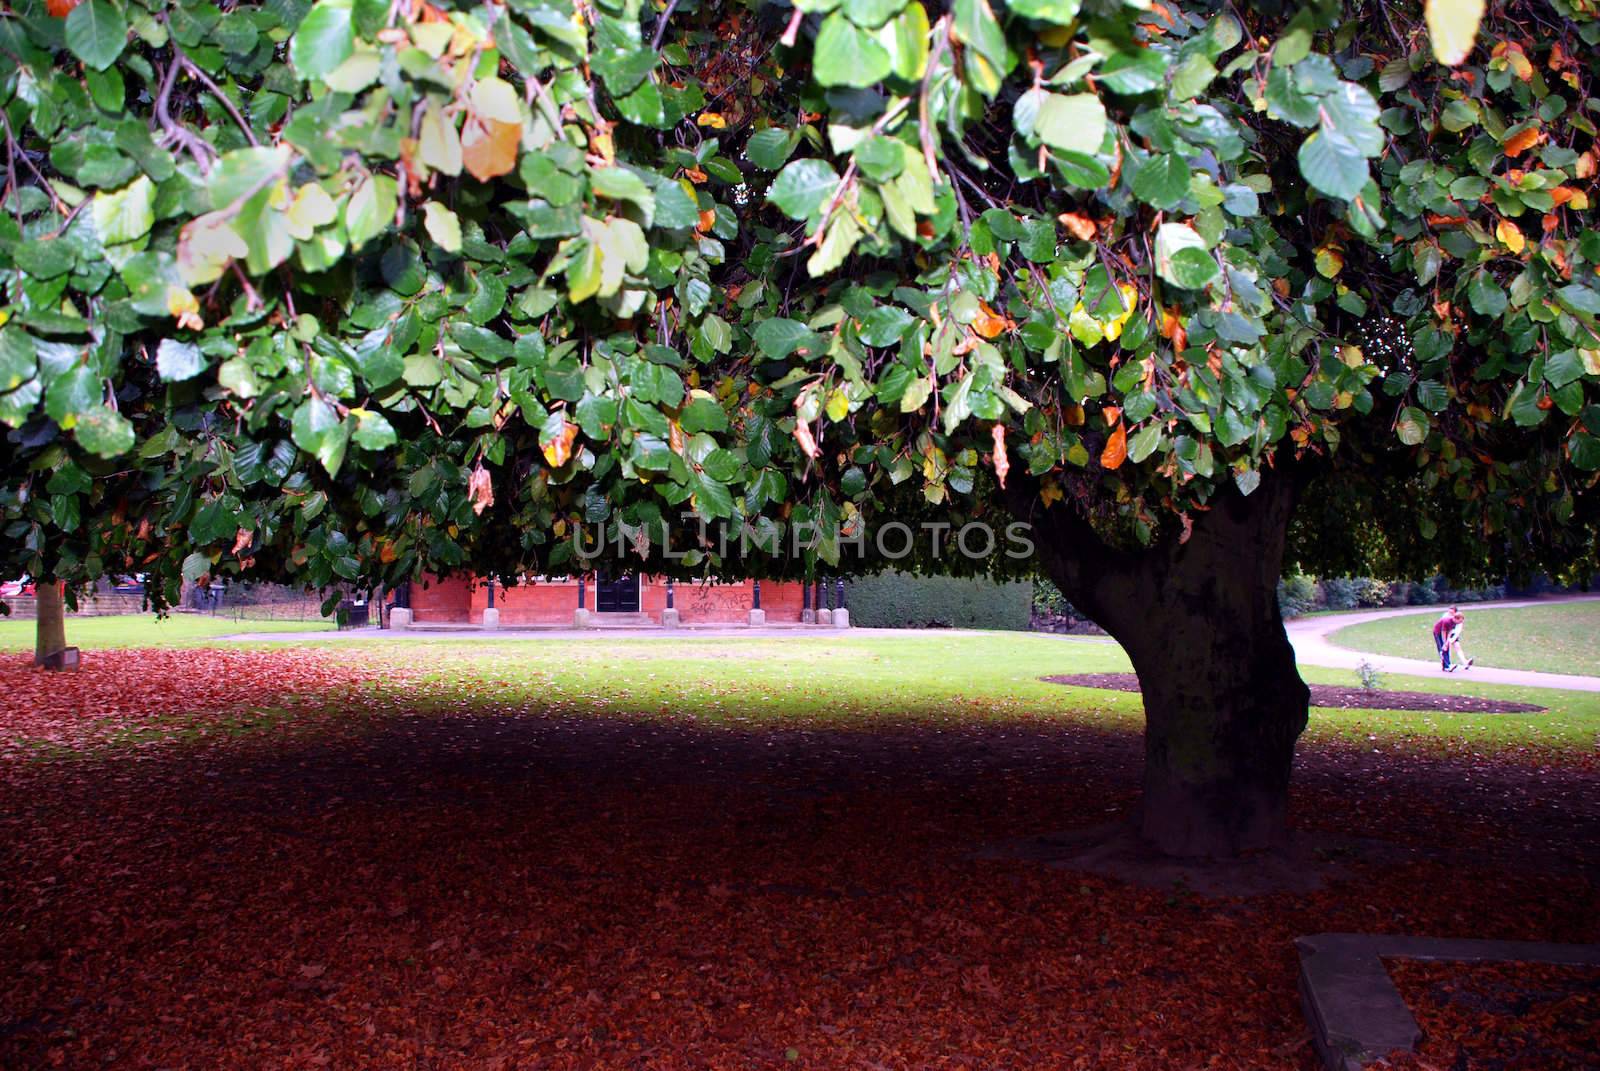 A photograph of a large tree in a park in Sheffield, England, with the floor covered in autumn leaves